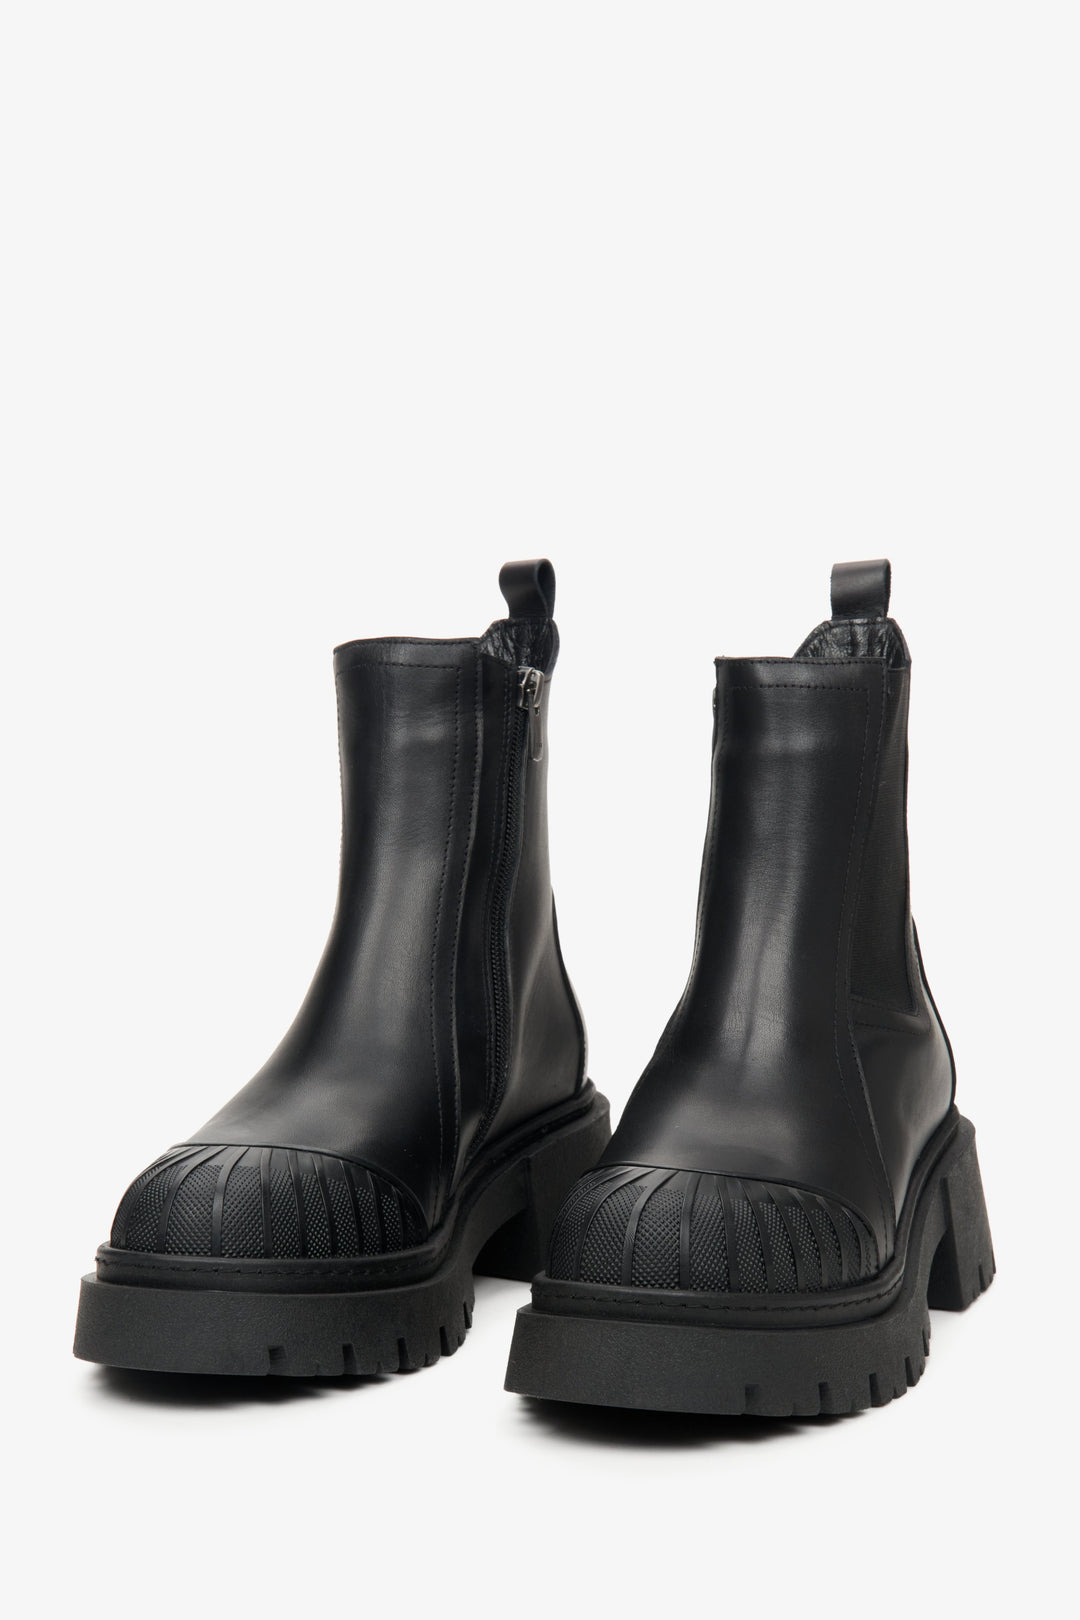 Black women's leather ankle boots by Estro in black - close-up on the toe cap of the boots.